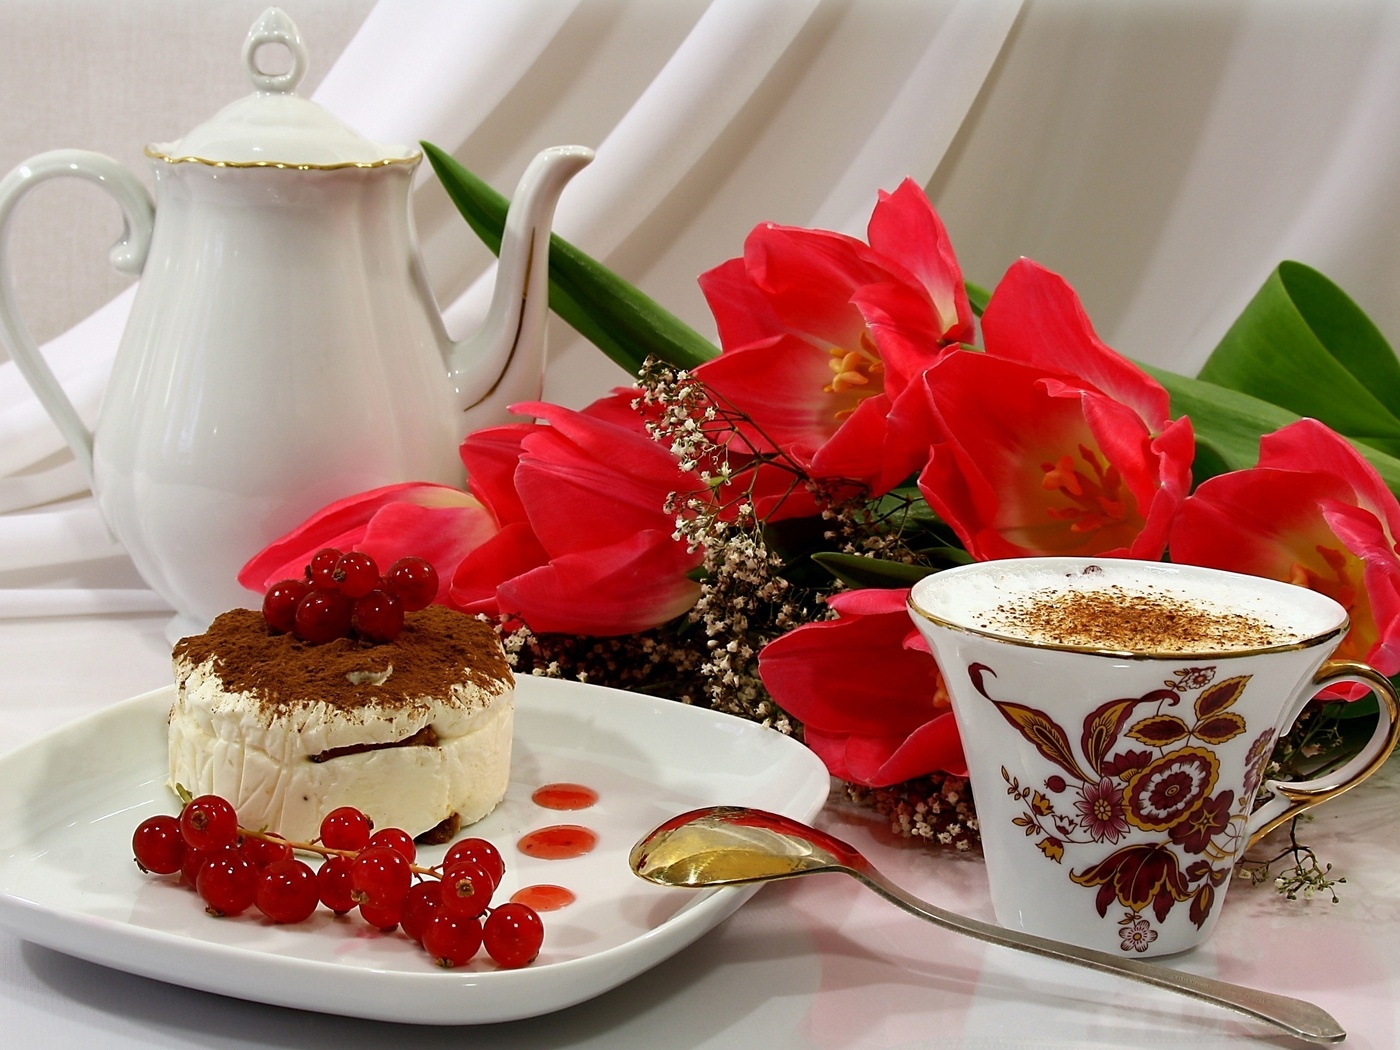 , coffee, flowers, cup, Cake, , red, tulip, red tulips, cappuccino